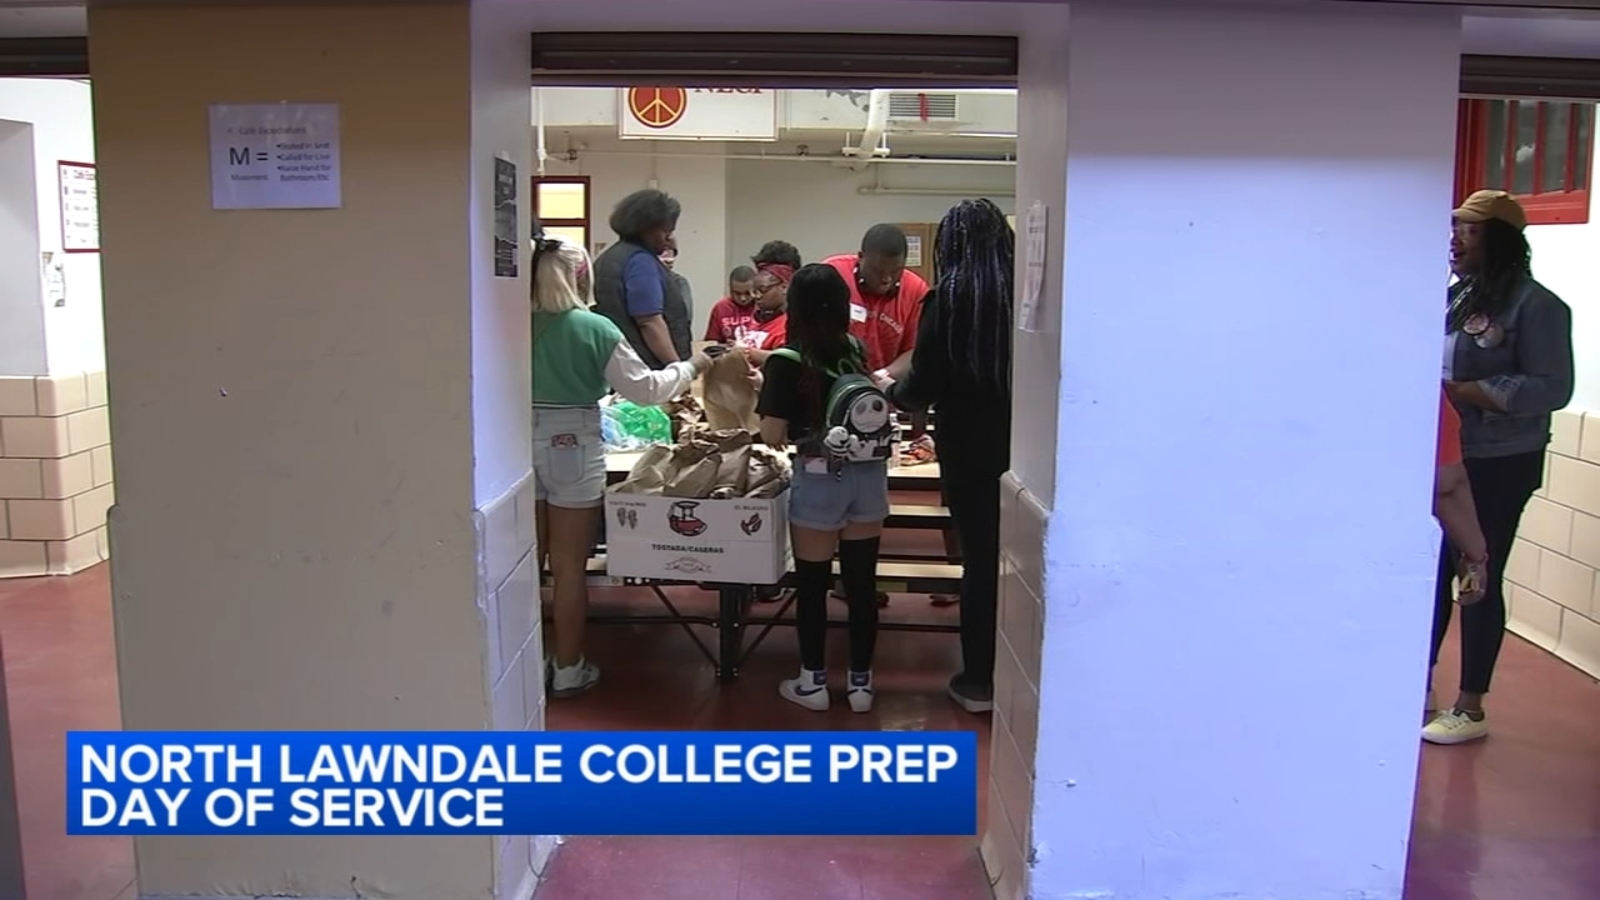 North Lawndale College Prep day of service gives back to community on the last day of school [Video]